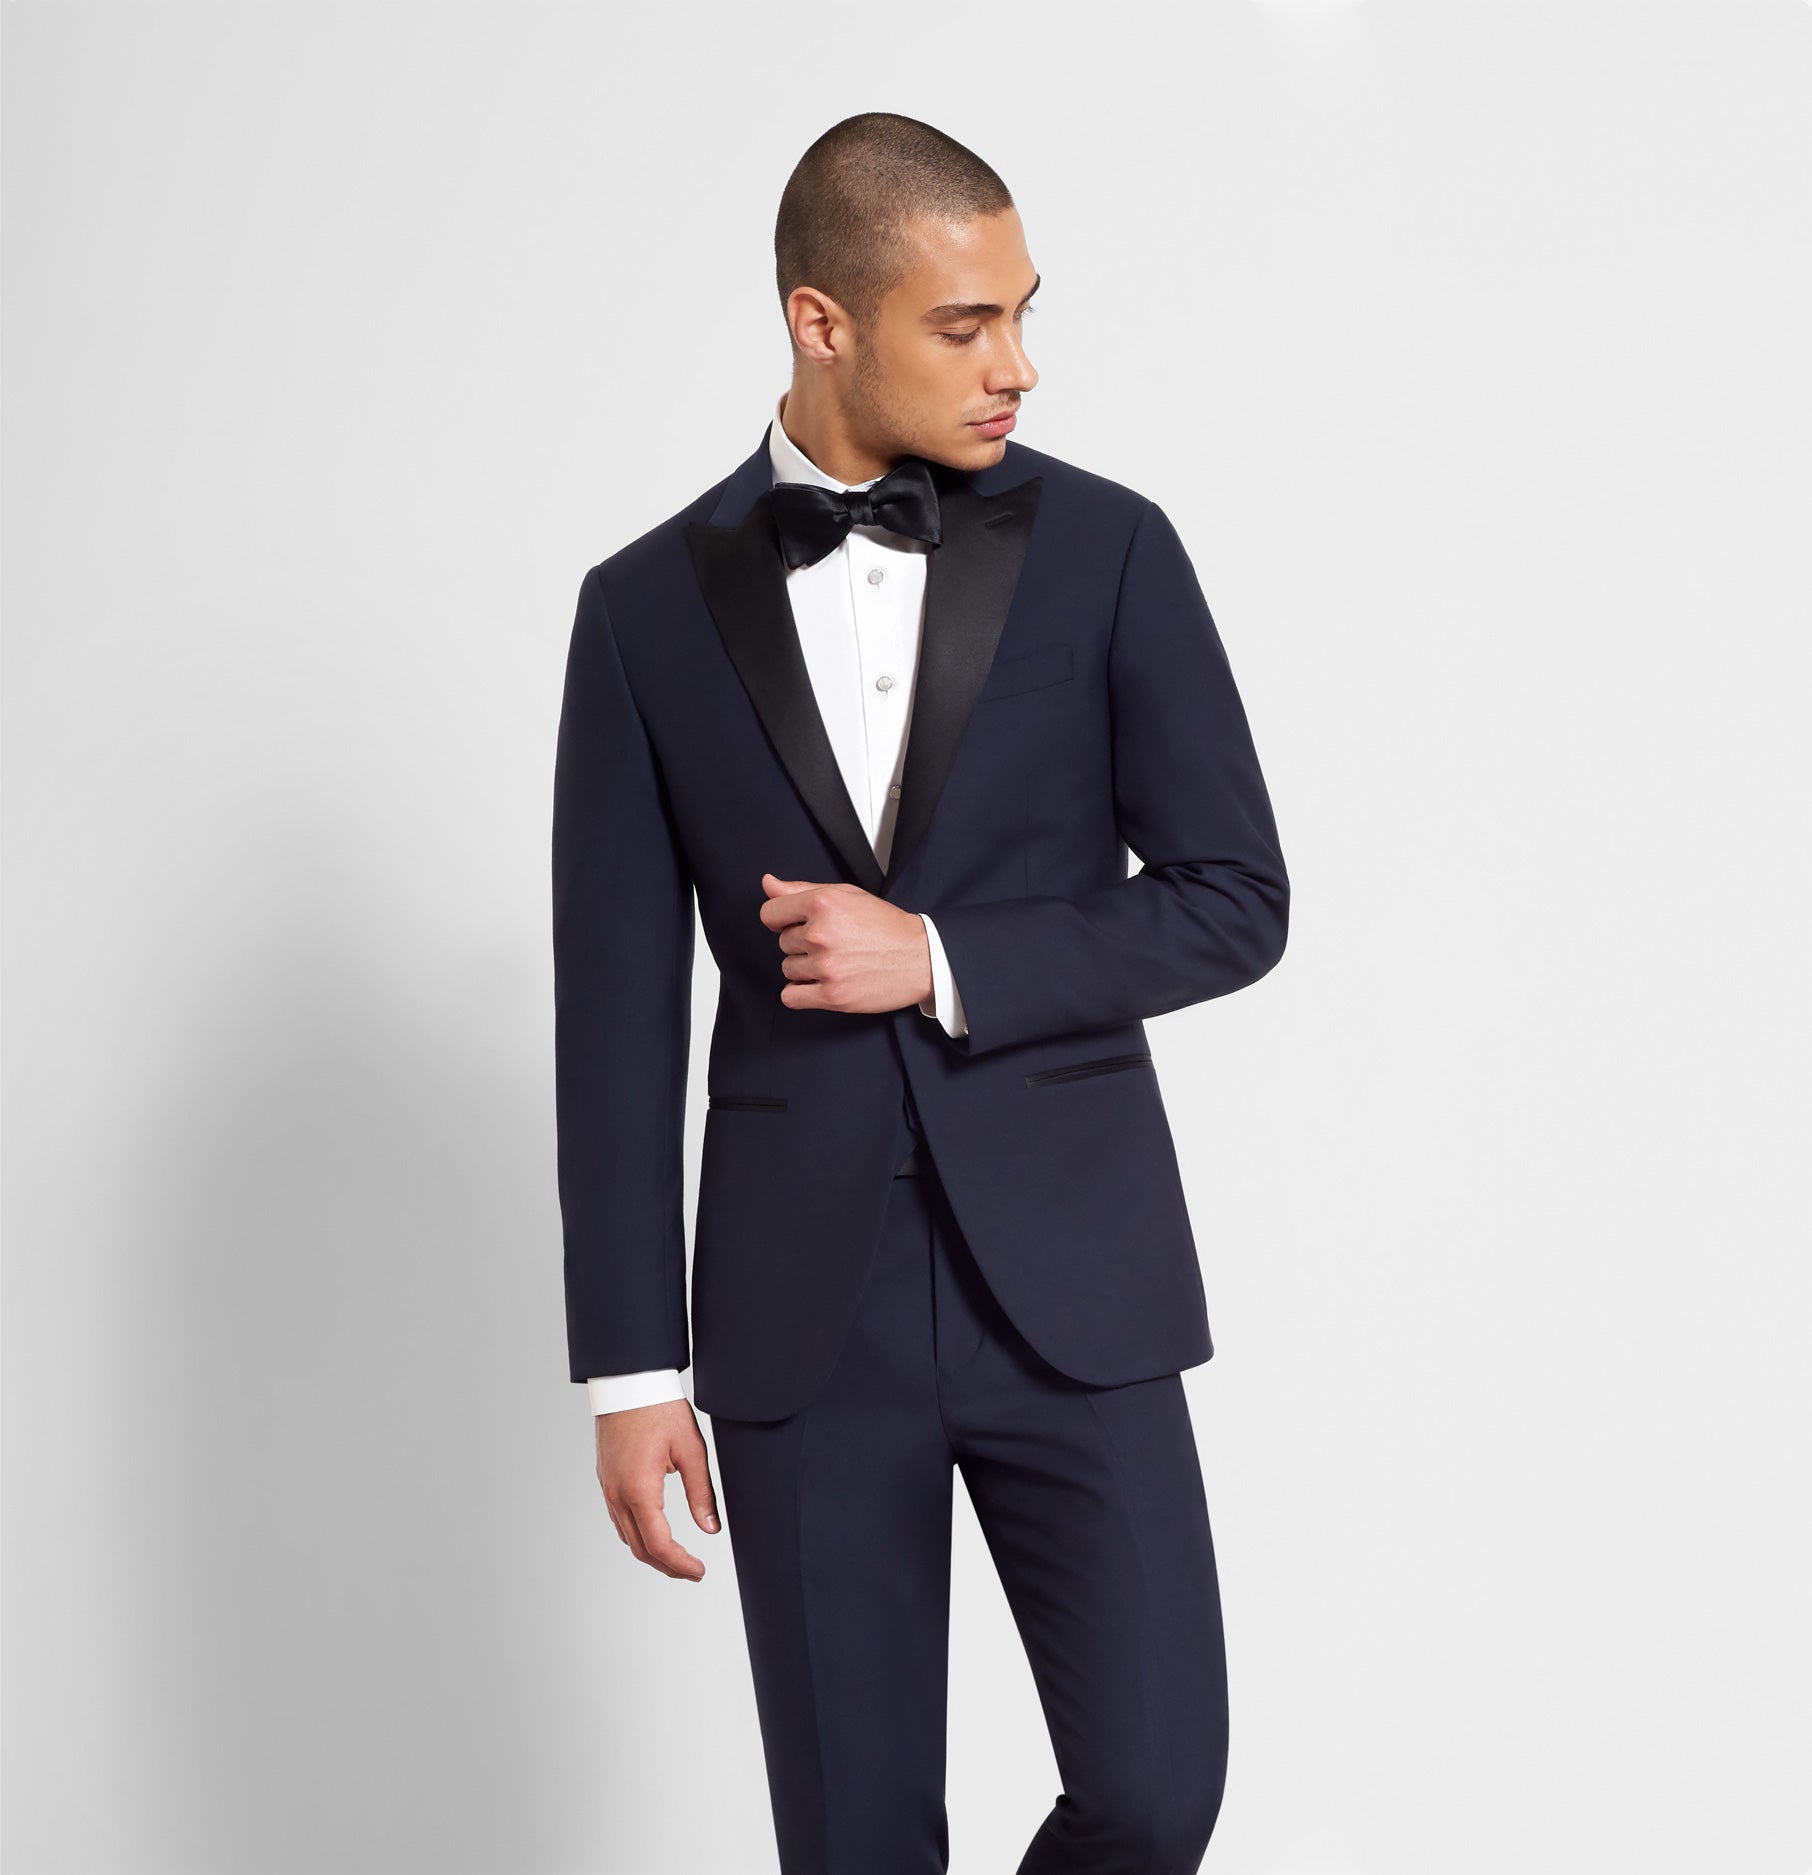 How to Wear a Blue Tuxedo — 5 Simple Rules | Black Lapel